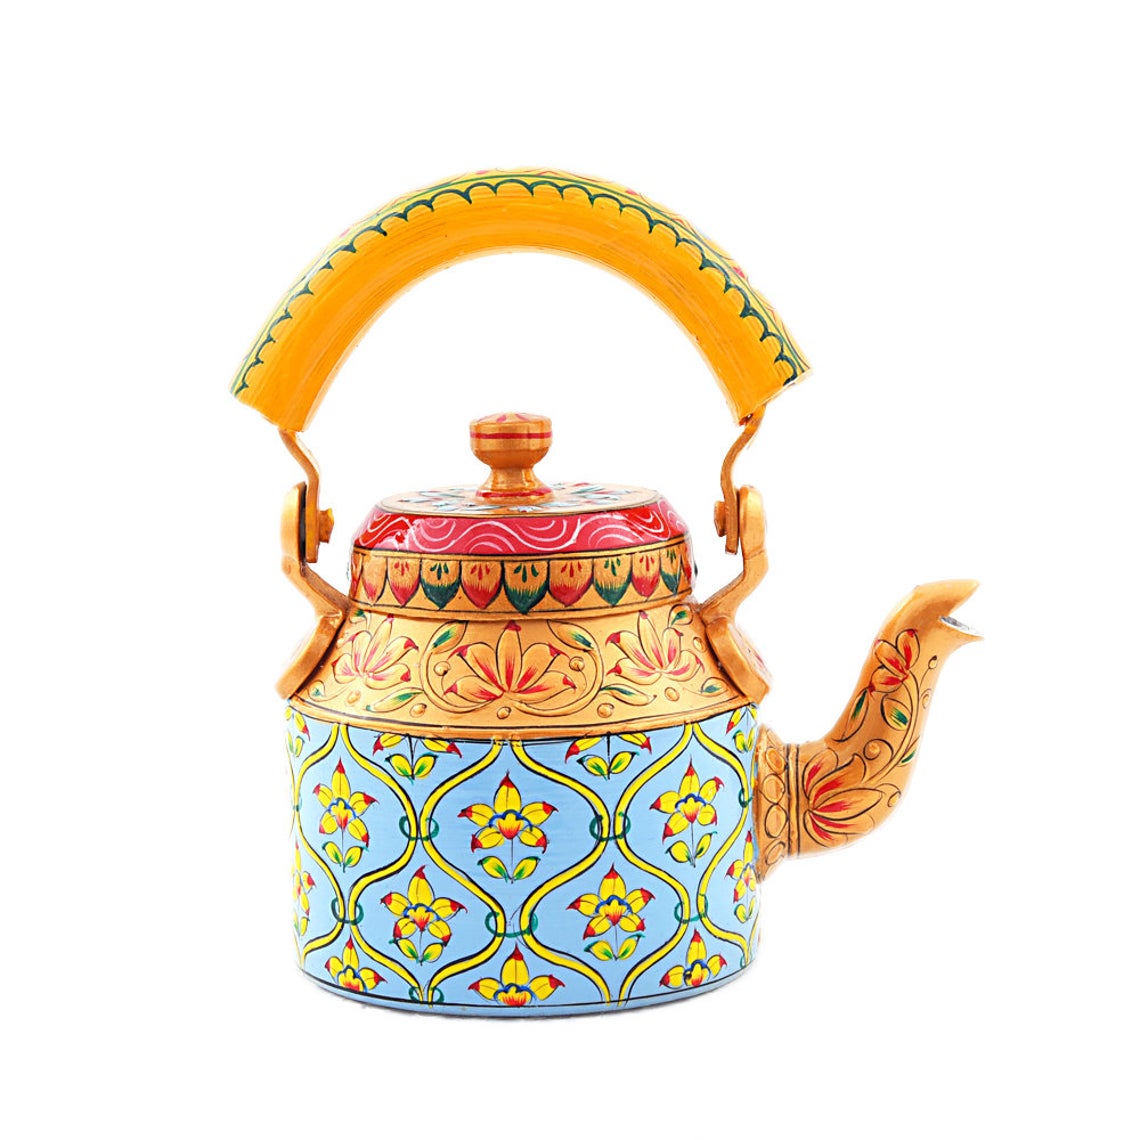 Antique Hand painted tea kettle Interior Design : SKY & Yellow  Chai Kettle, Traditional Indian tea kettle, Tea brewer, Gift for tea lovers